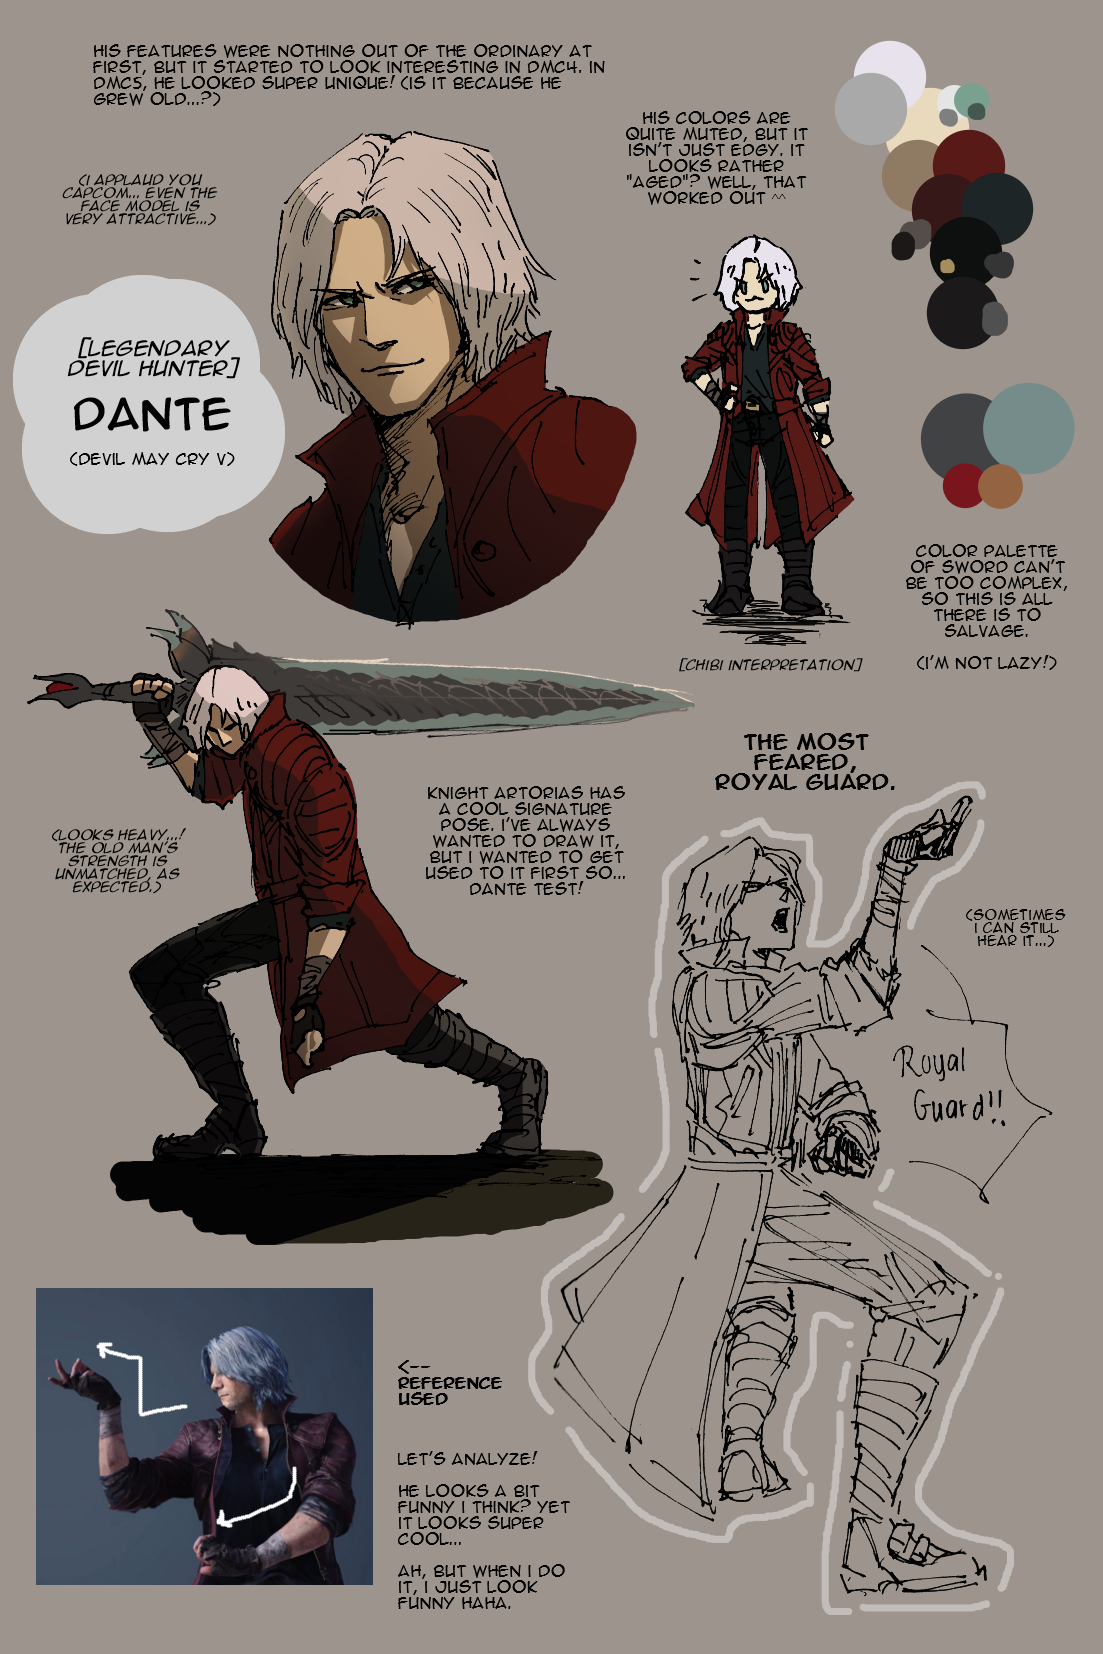 Dante screenshots, images and pictures - Comic Vine